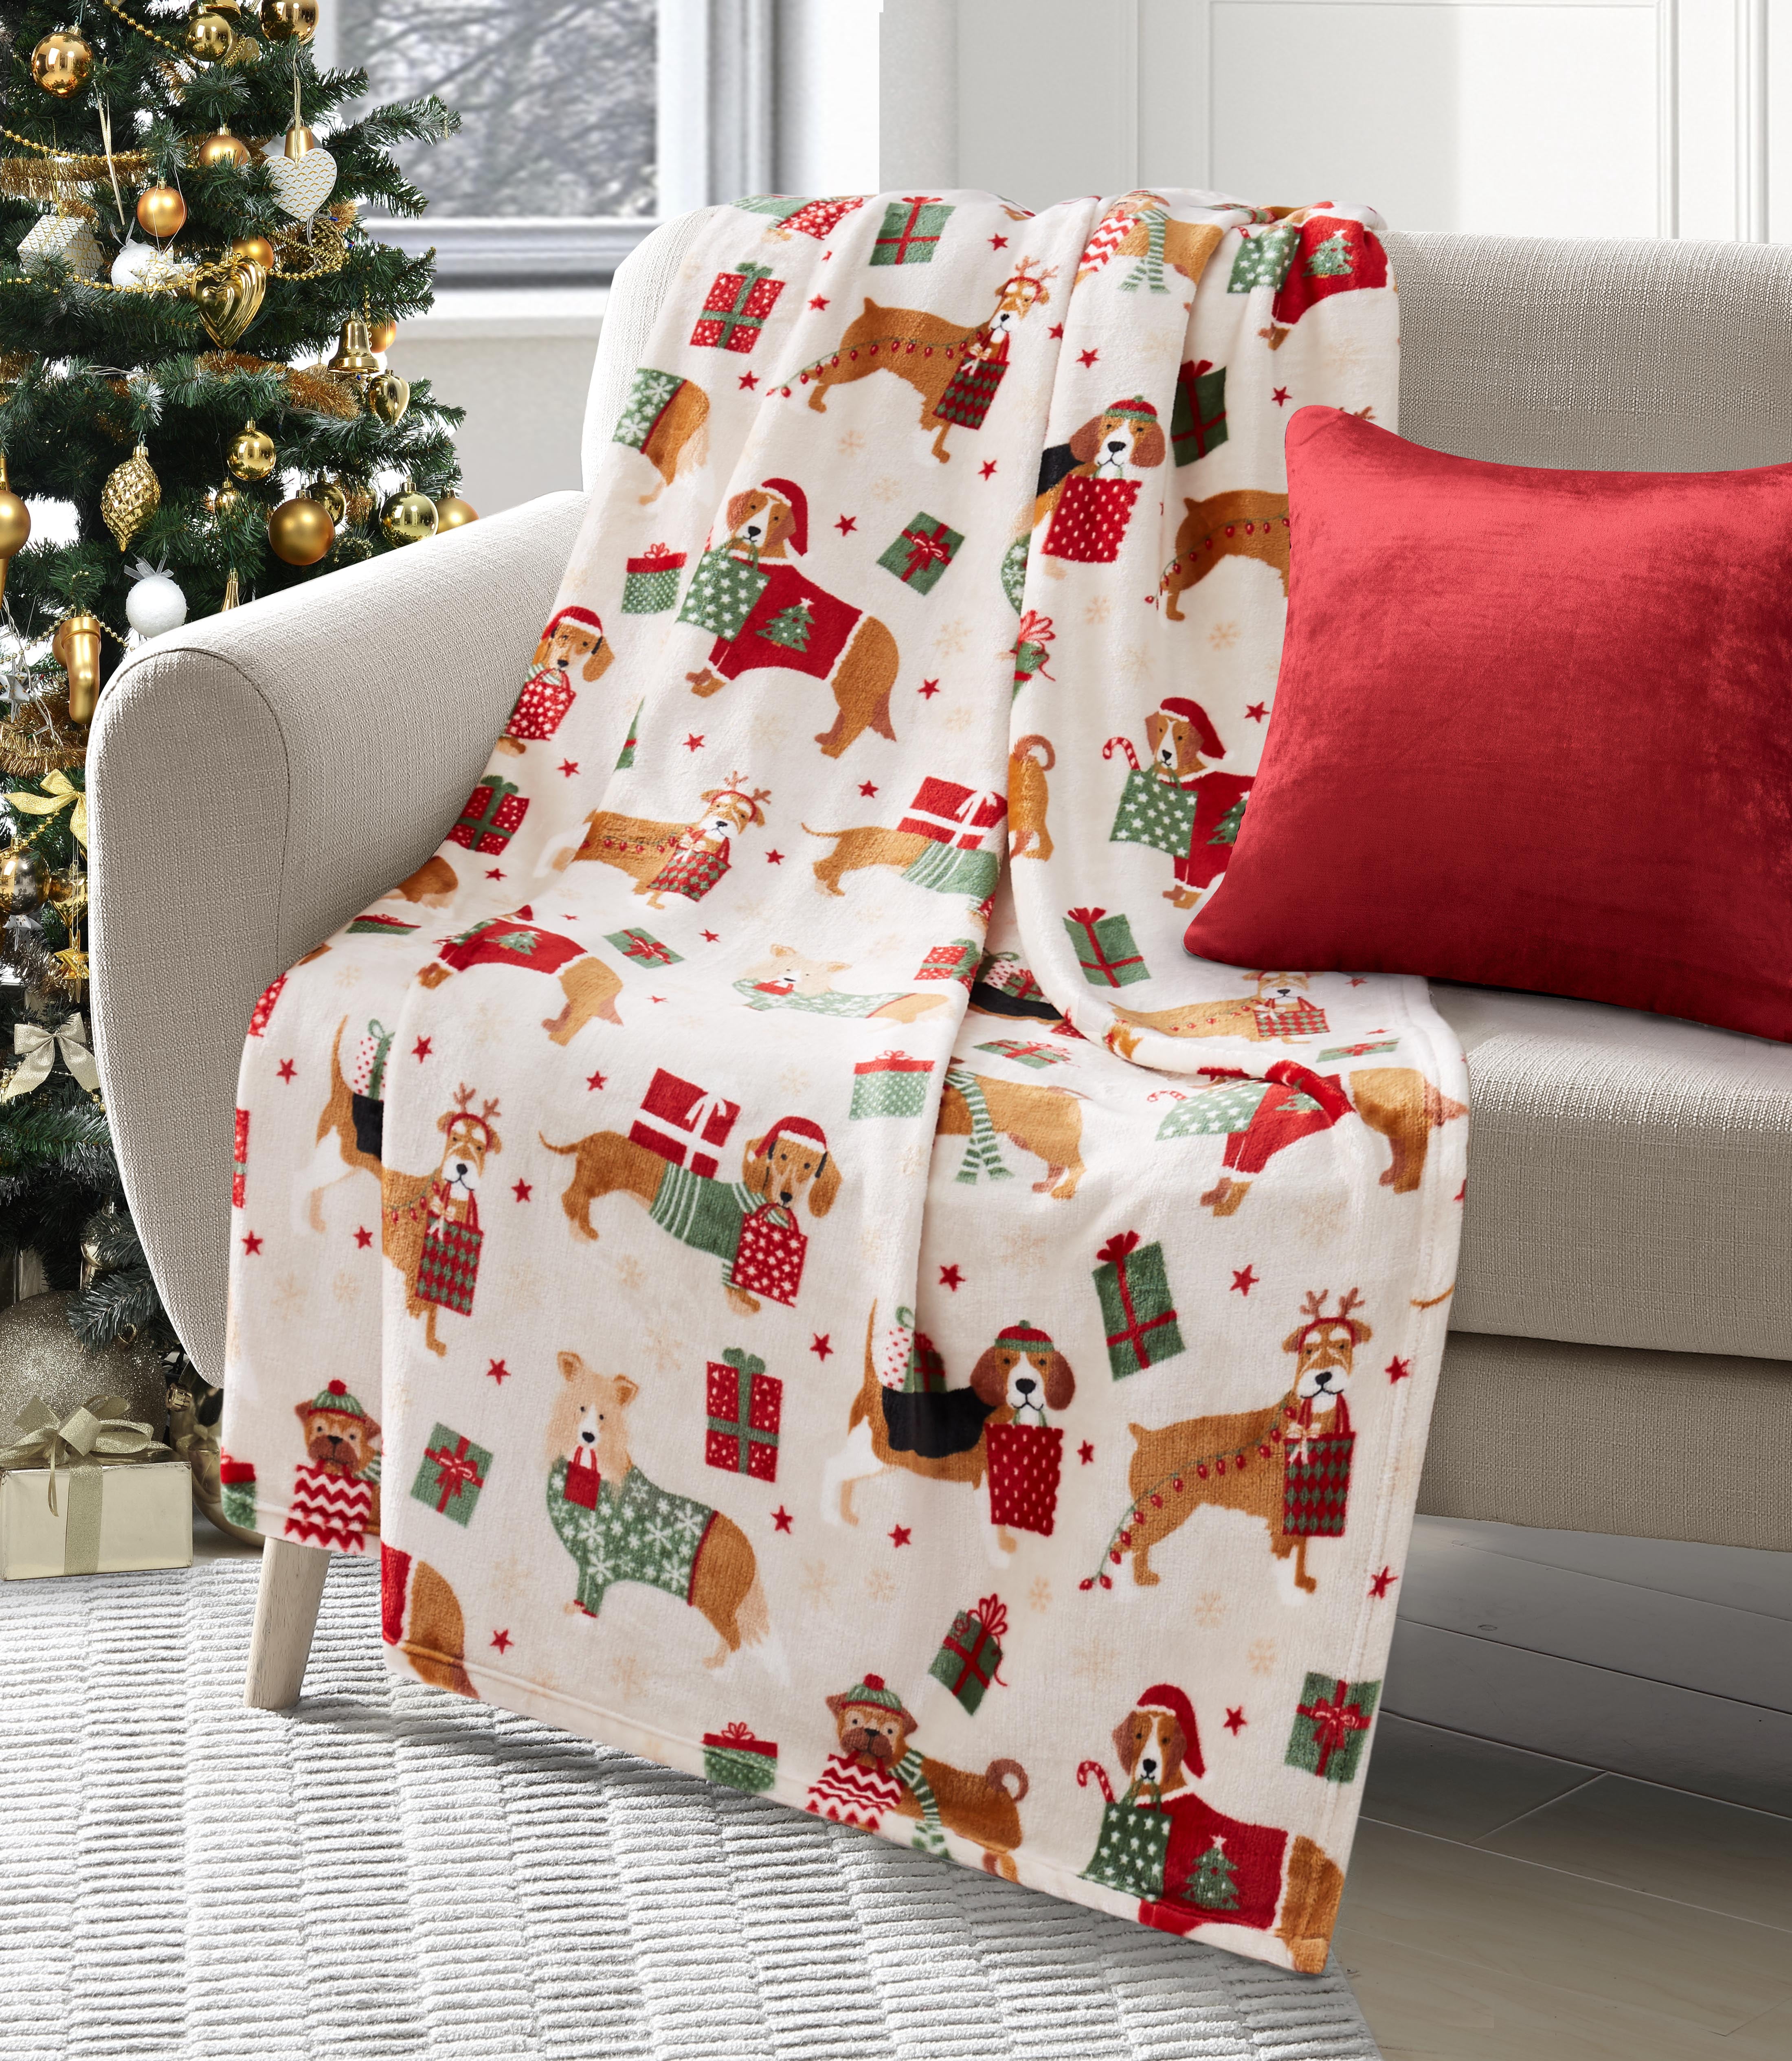 ALAZA Home Decor Merry Christmas Puppy Dog Gift Blanket Soft Warm Blankets for Bed Couch Sofa Lightweight Travelling Camping 60 x 50 Inch Throw Size for Boys Women